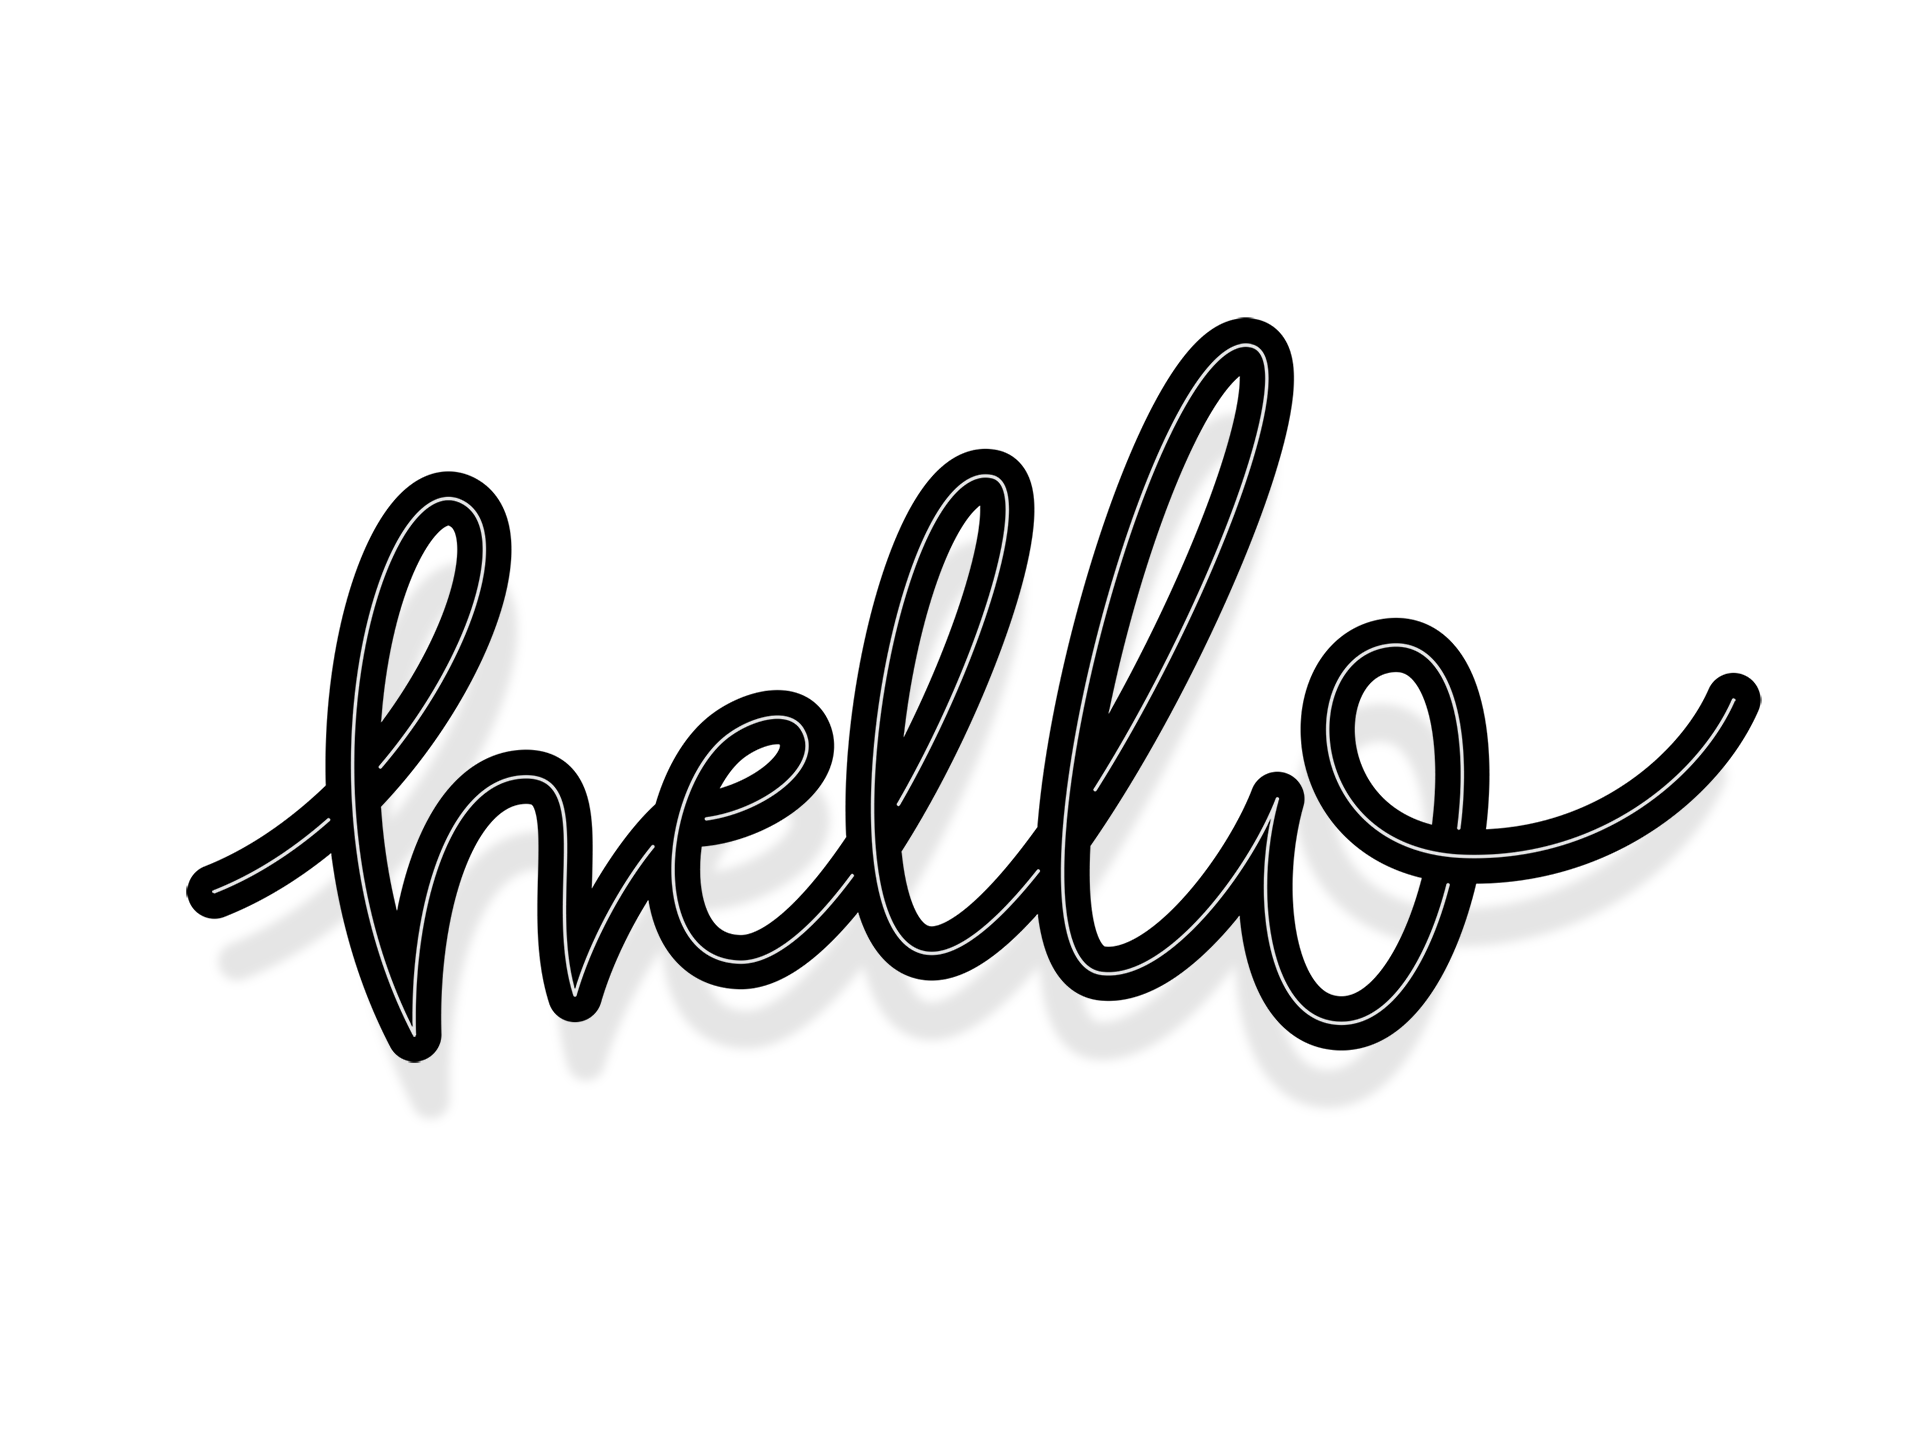 Hello - Hand-lettered word mark created by ItemOne